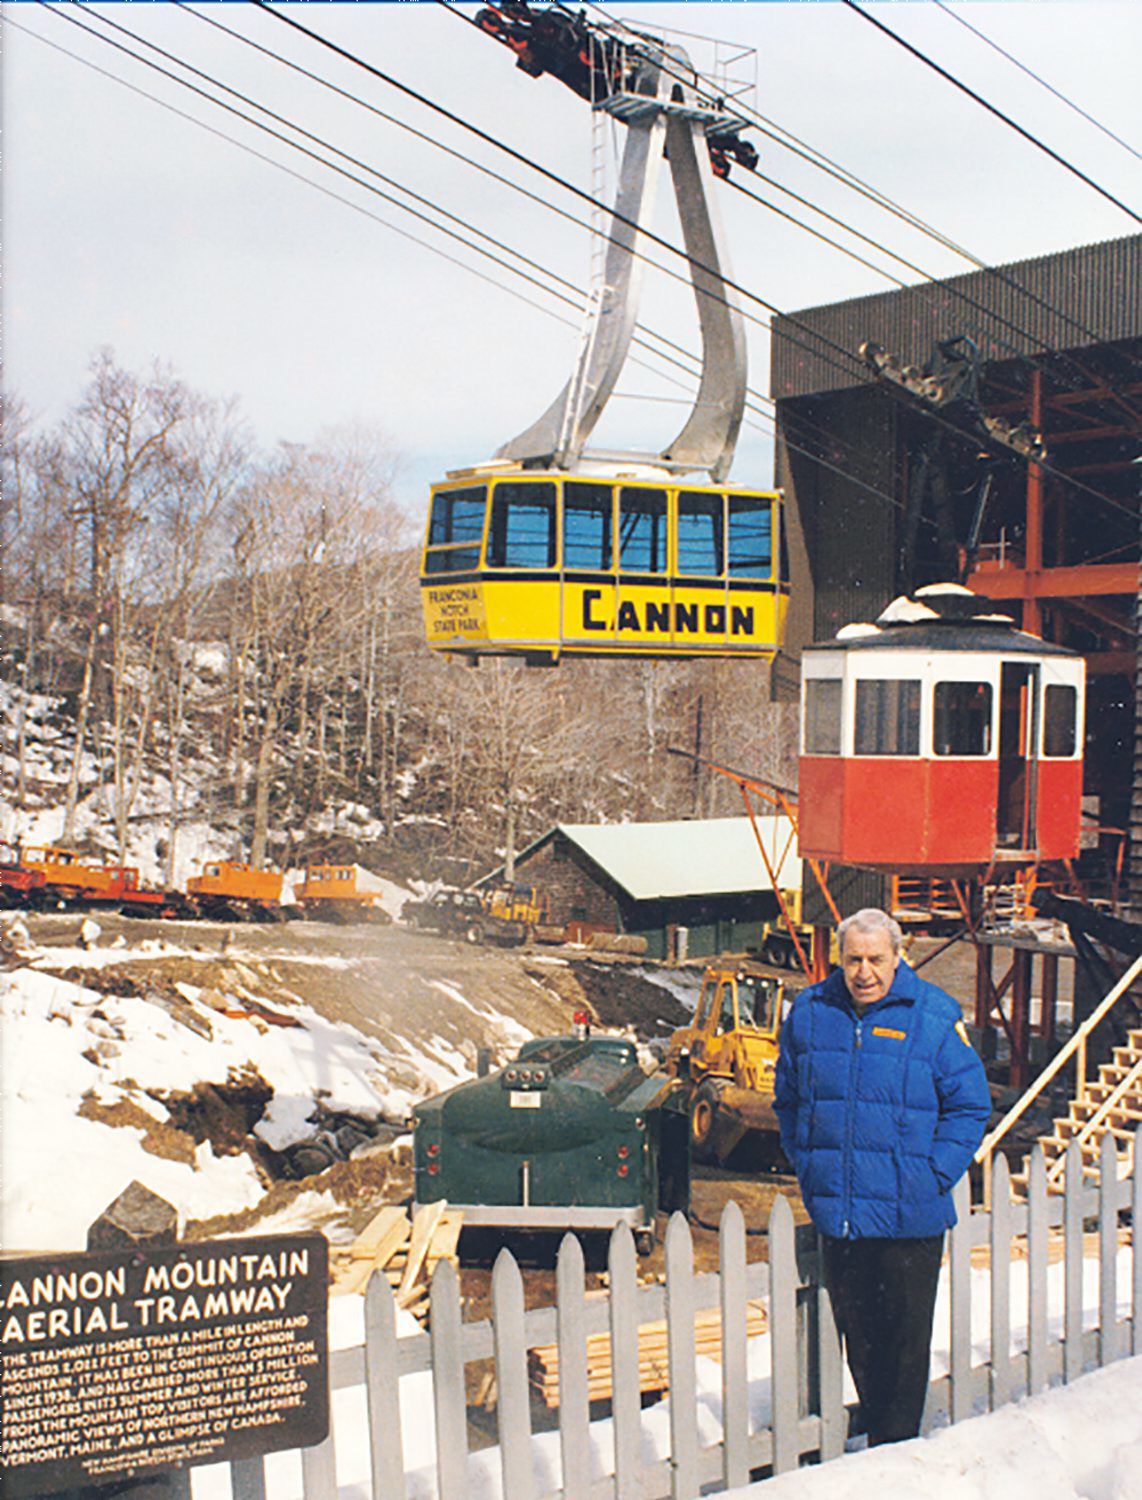 cannon mountain aerial tramway